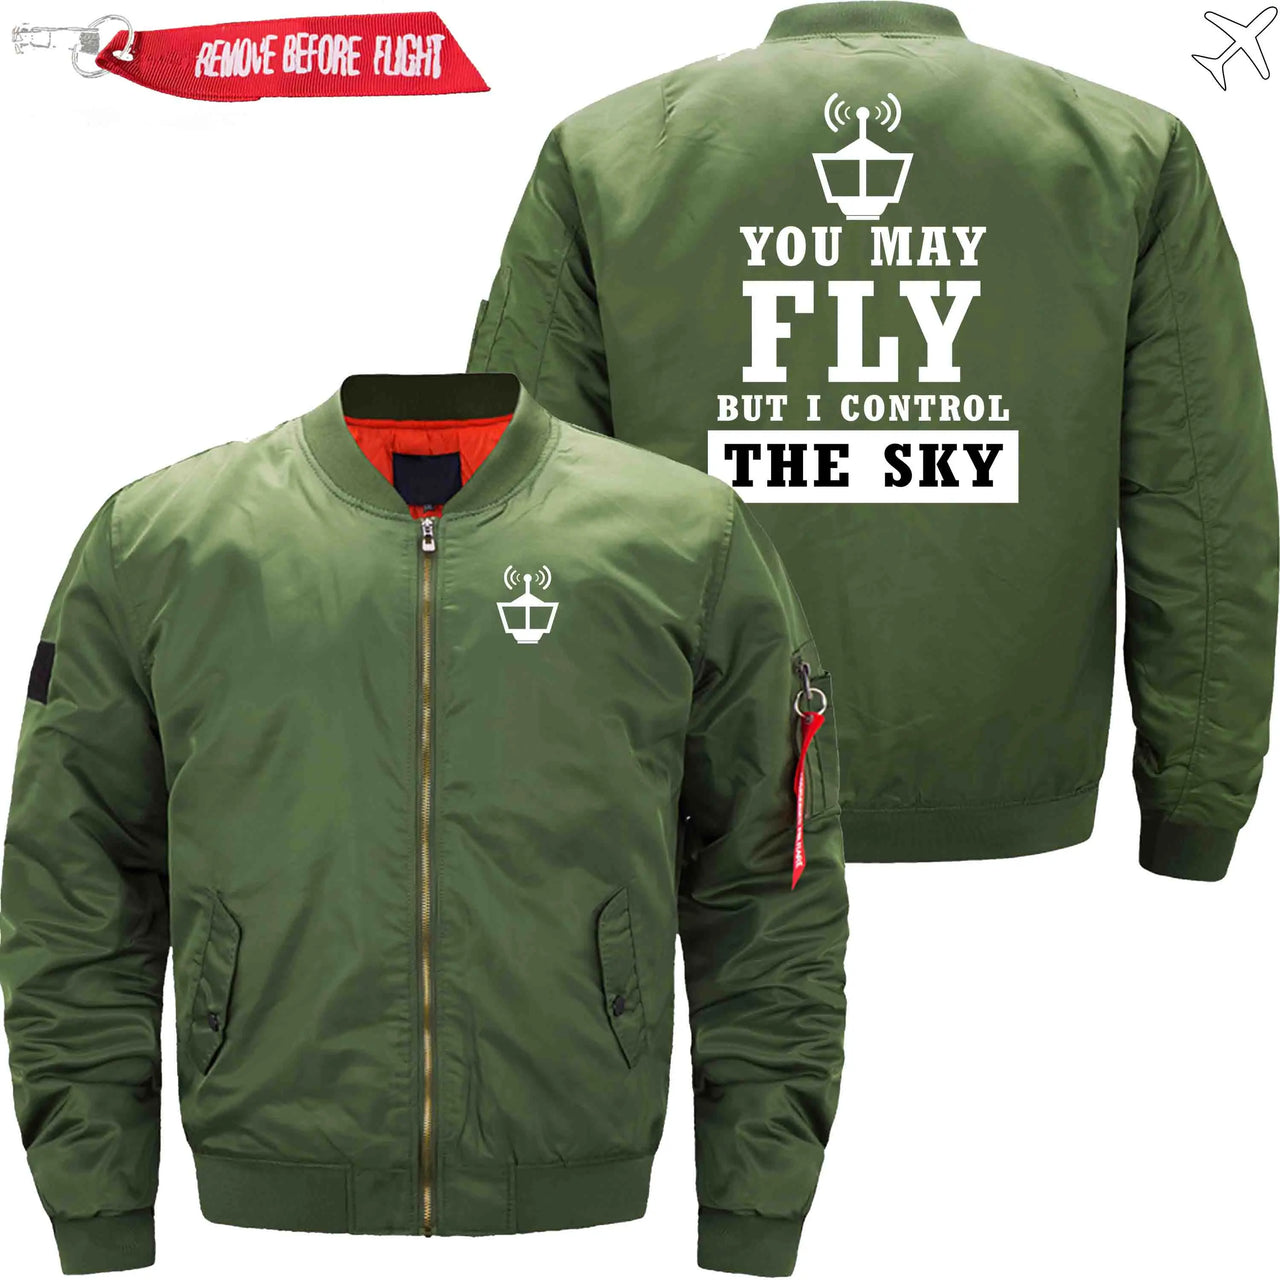 YOU MAY FLY BUT I CONTROL THE SKY - JACKET THE AV8R